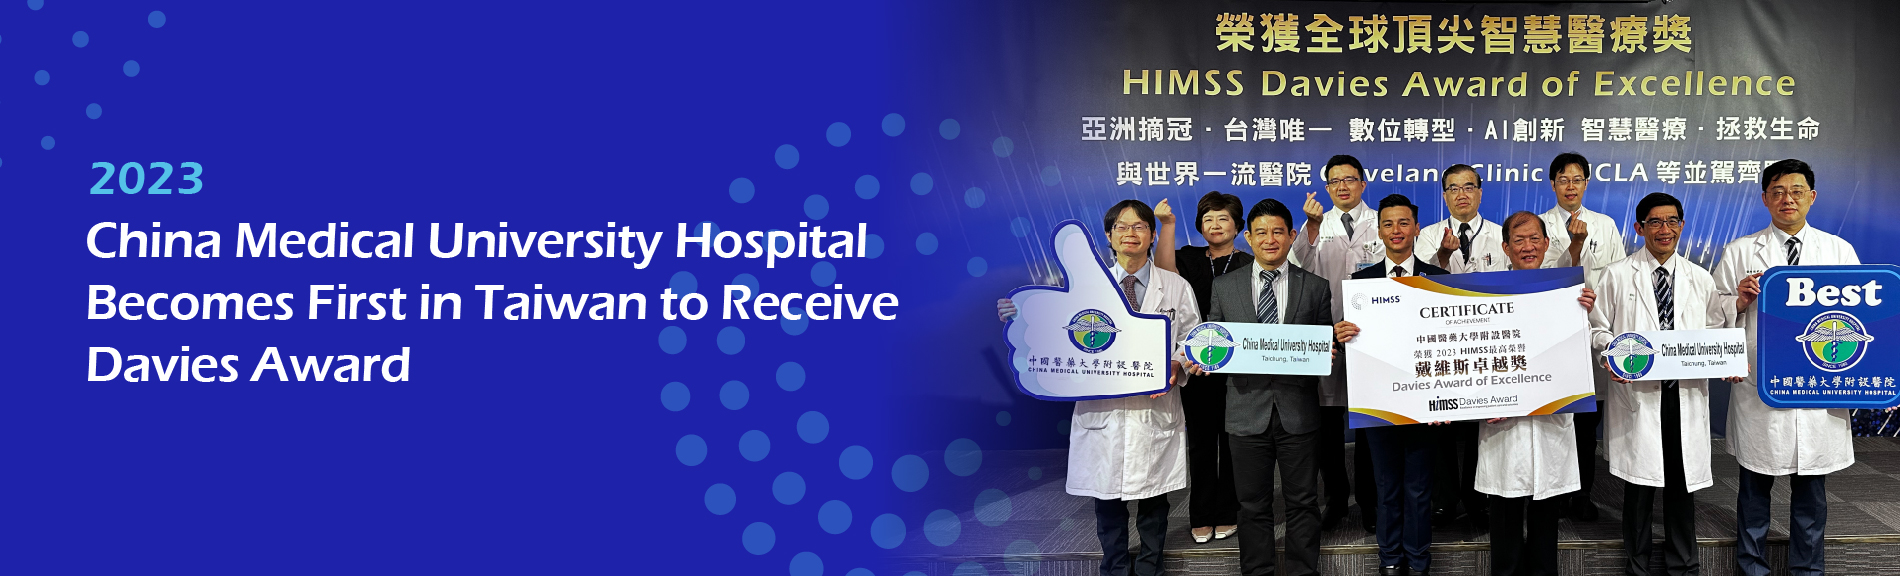 China Medical University Hospital Becomes First in Taiwan to Receive Davies Award